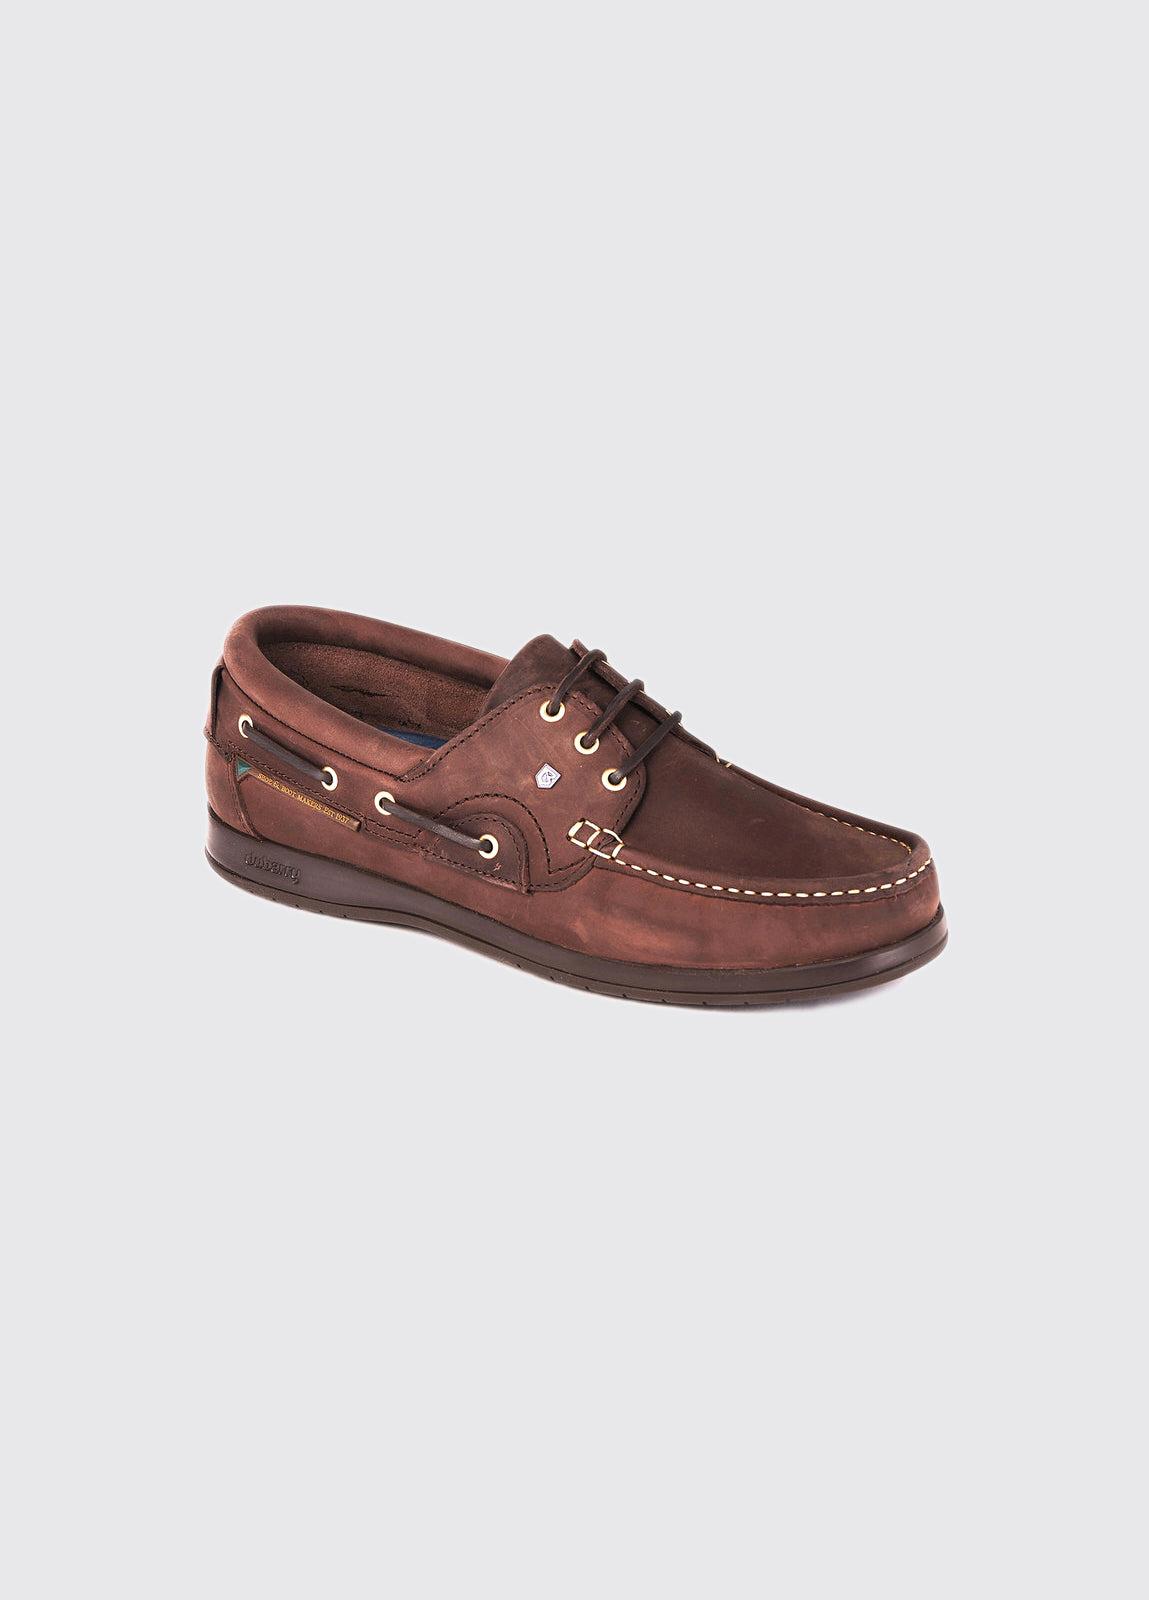 Commodore XLT Deck Shoe - Old Rum